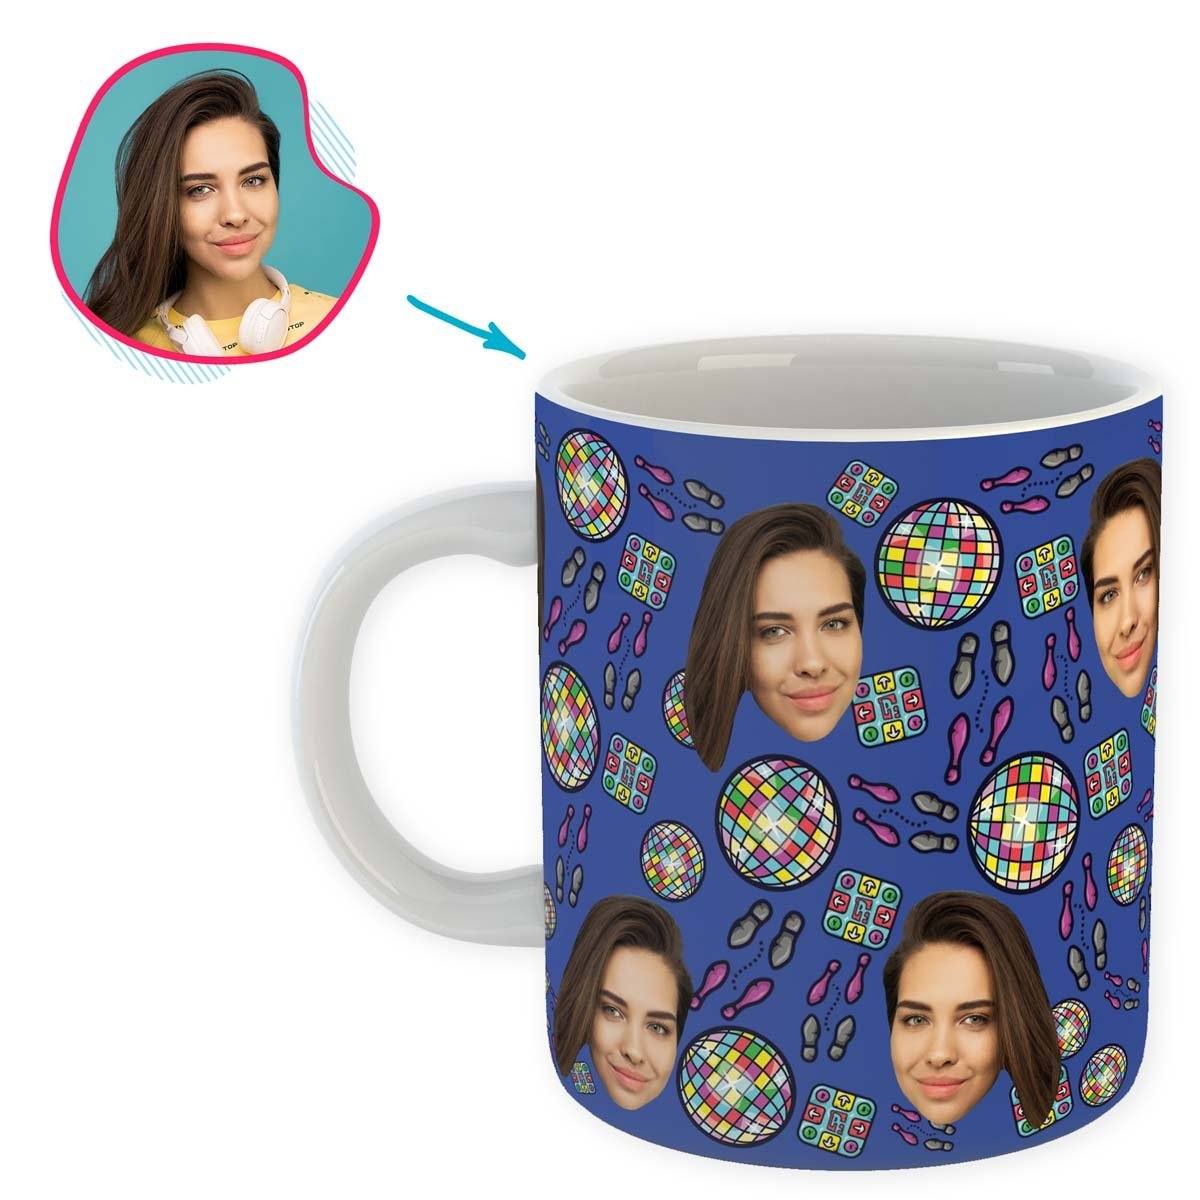 darkblue Dancing mug personalized with photo of face printed on it